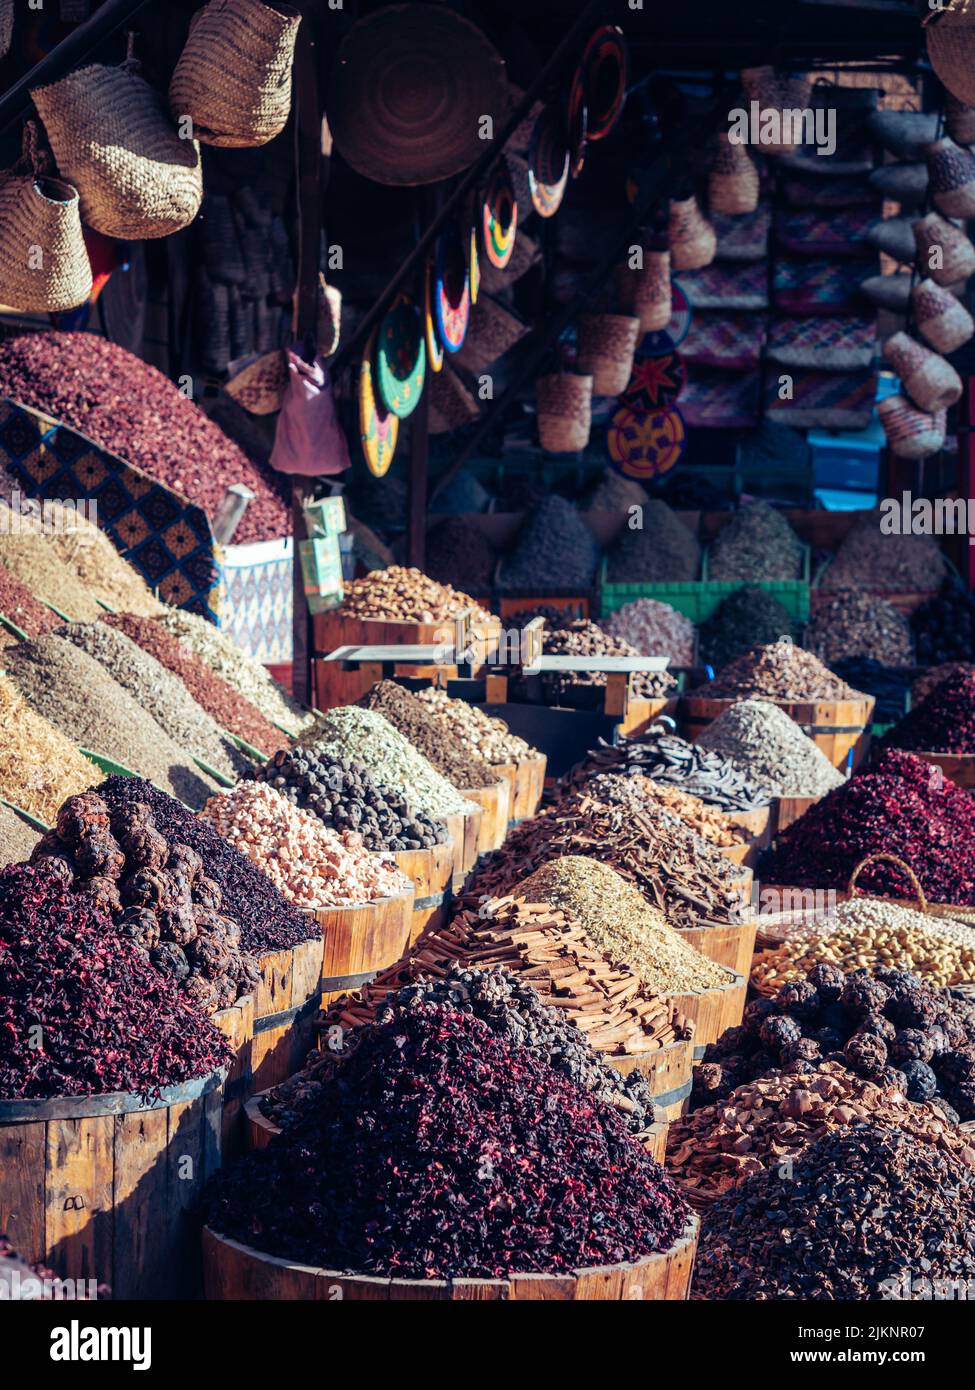 A market full of spices in Aswan Stock Photo